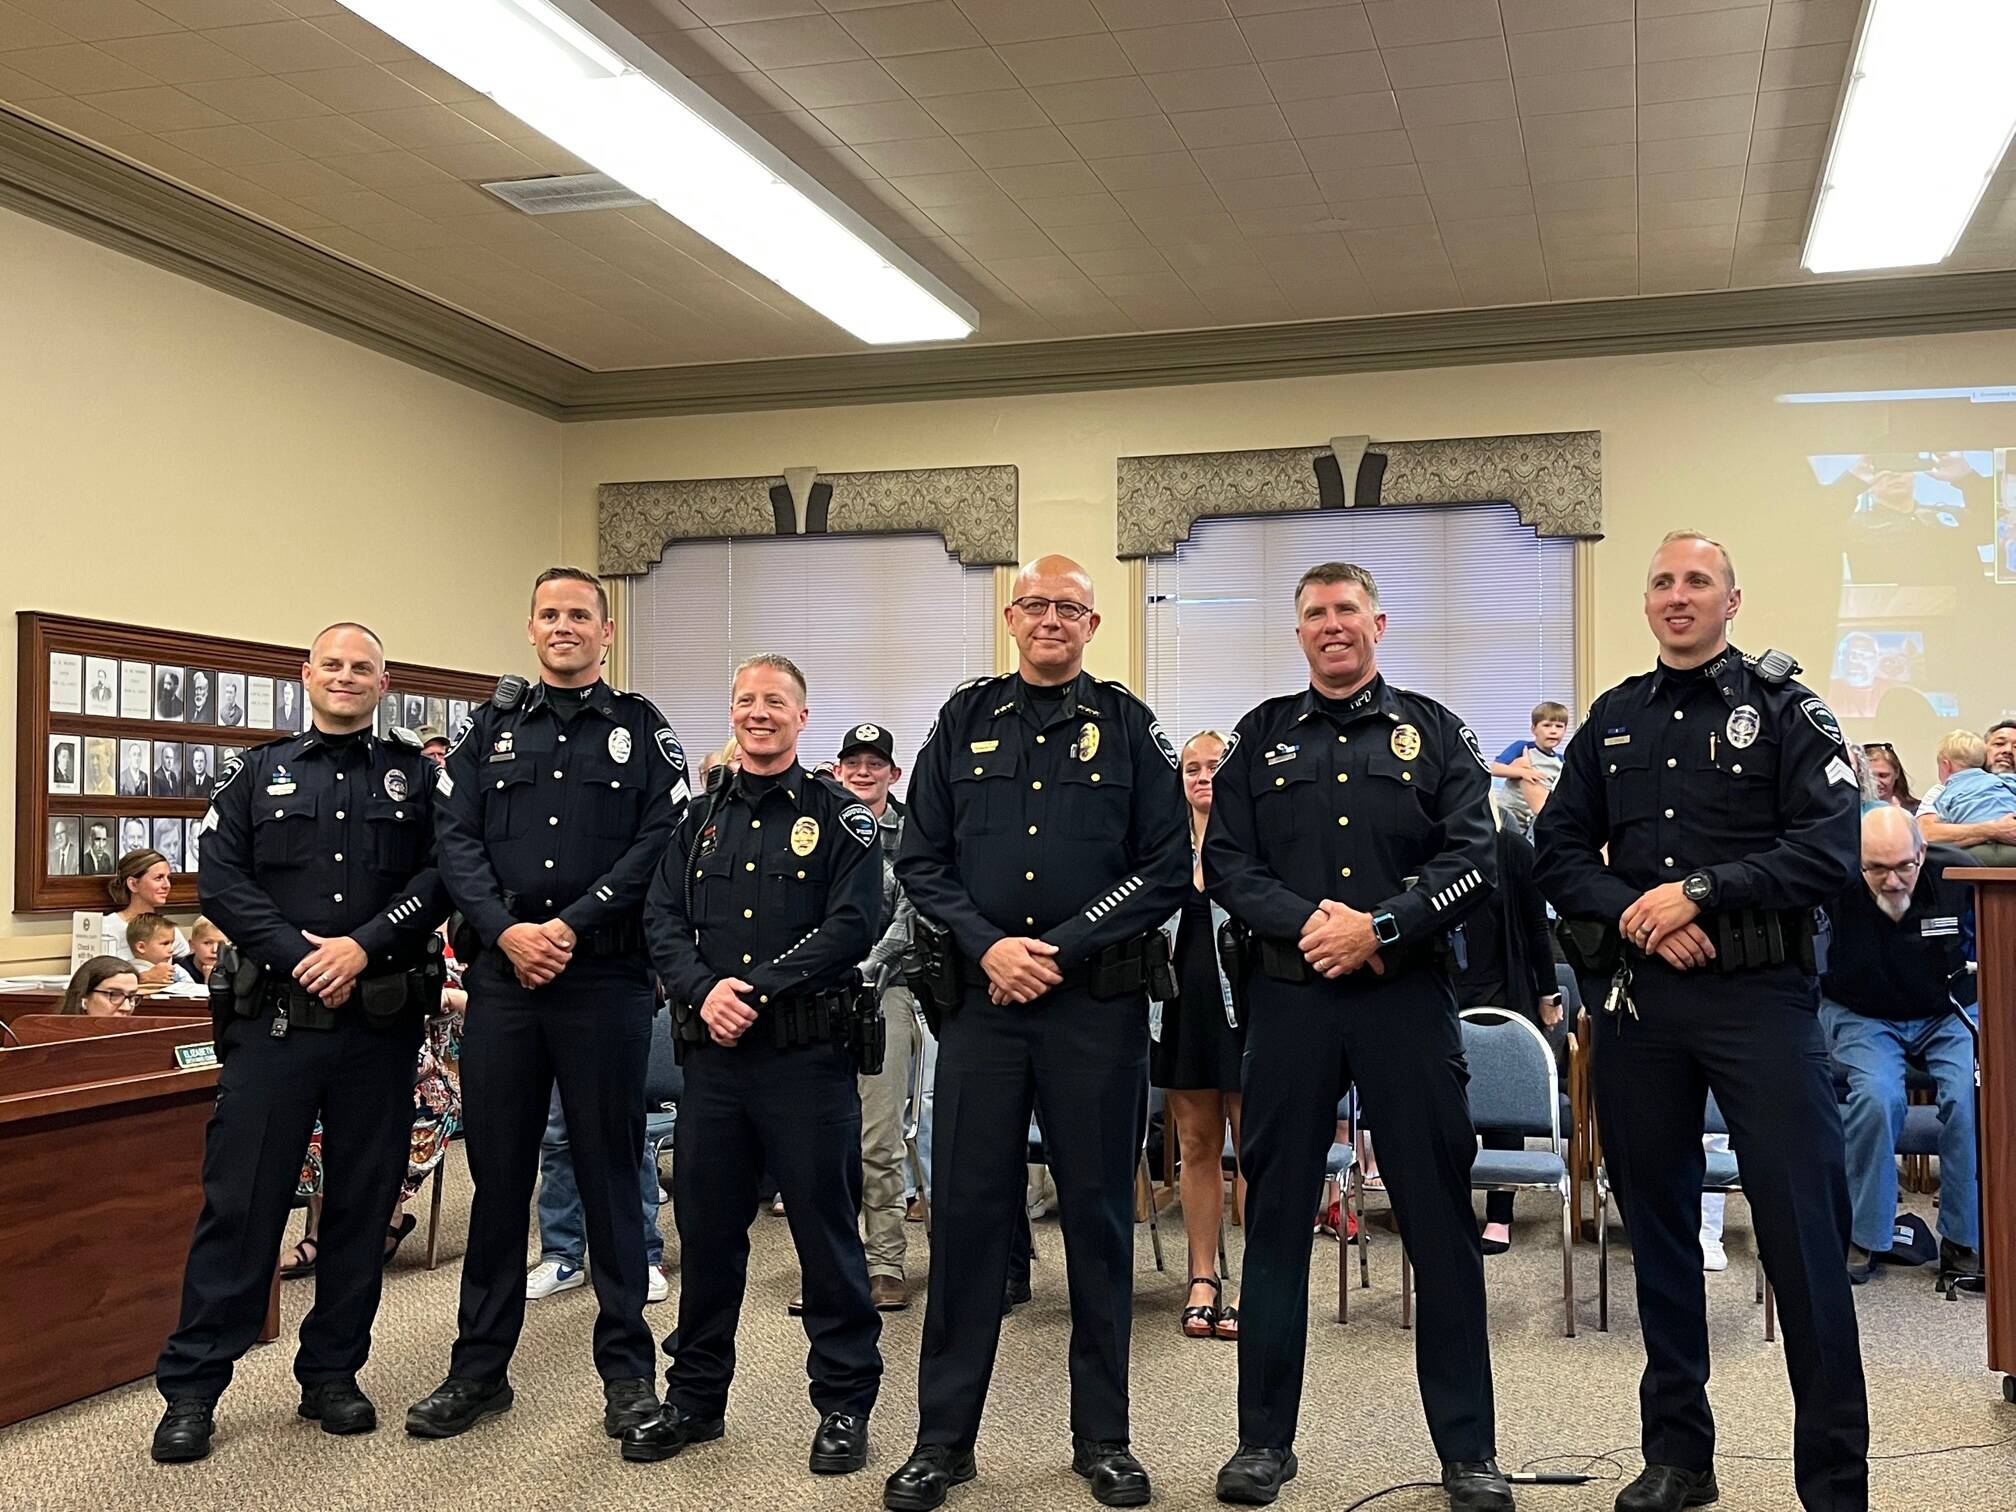 Hoquiam Police Department Sgt. David Peterson, Sgt. Rob Verboomen, Lt. Jeff Salstrom, Chief Joe Strong, Lt. Brian Dayton and Sgt. Jerad Spaur all line up for a photo in their uniforms after they received their confirmation to police chief, and their promotions to lieutenant and sergeant. (Photo courtesy of Brian Shay.)